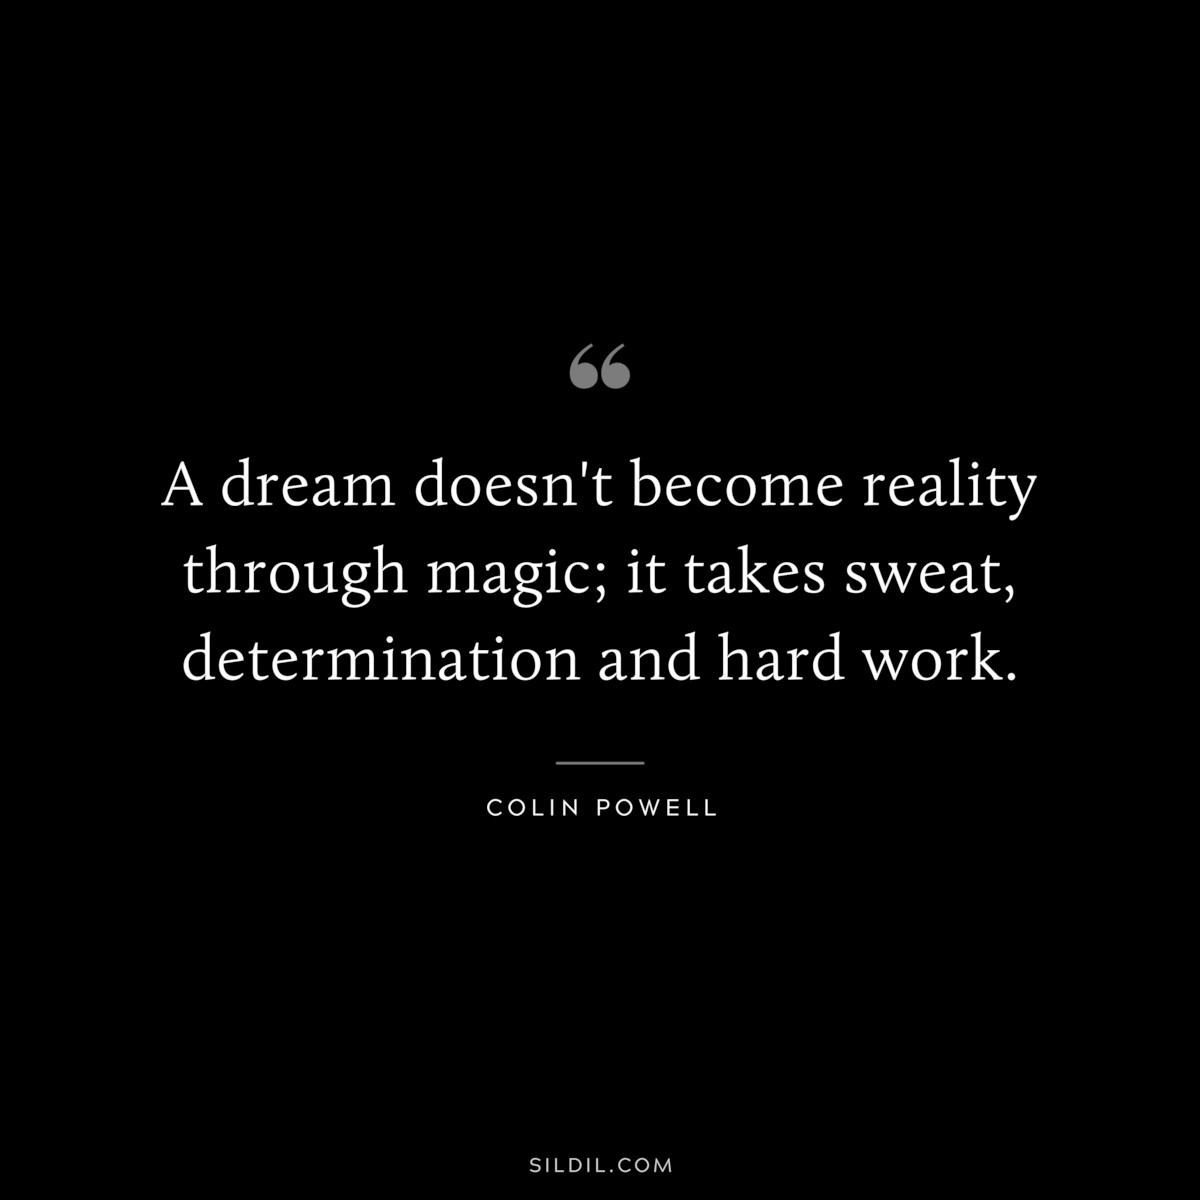 A dream doesn't become reality through magic; it takes sweat, determination and hard work. ― Colin Powell